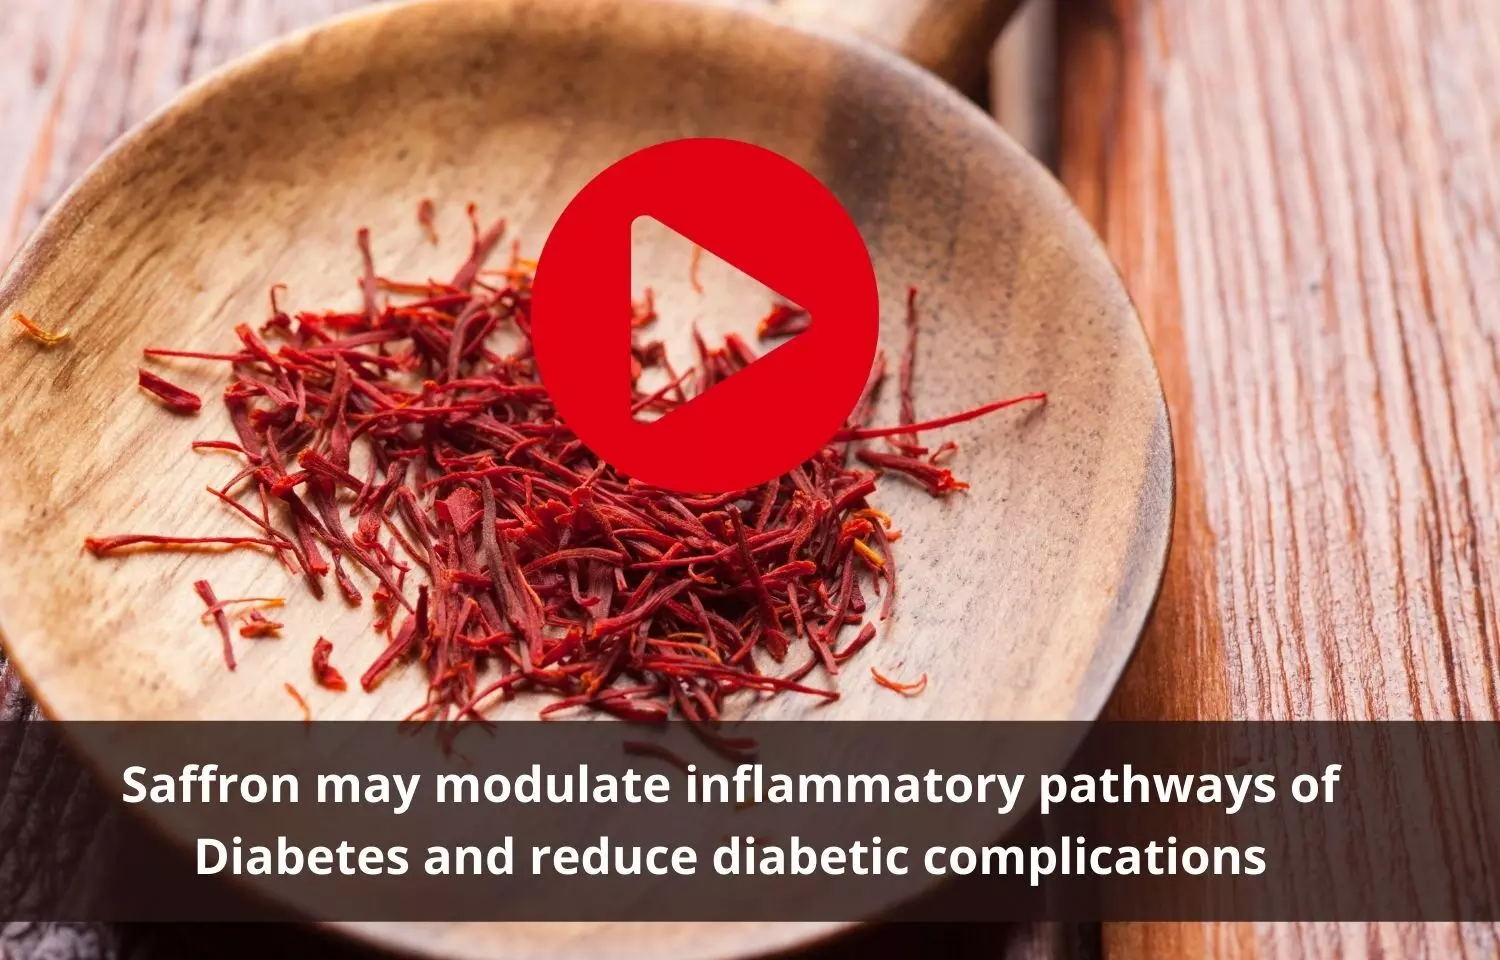 Saffron influences inflammatory pathways and reduce diabetic complications